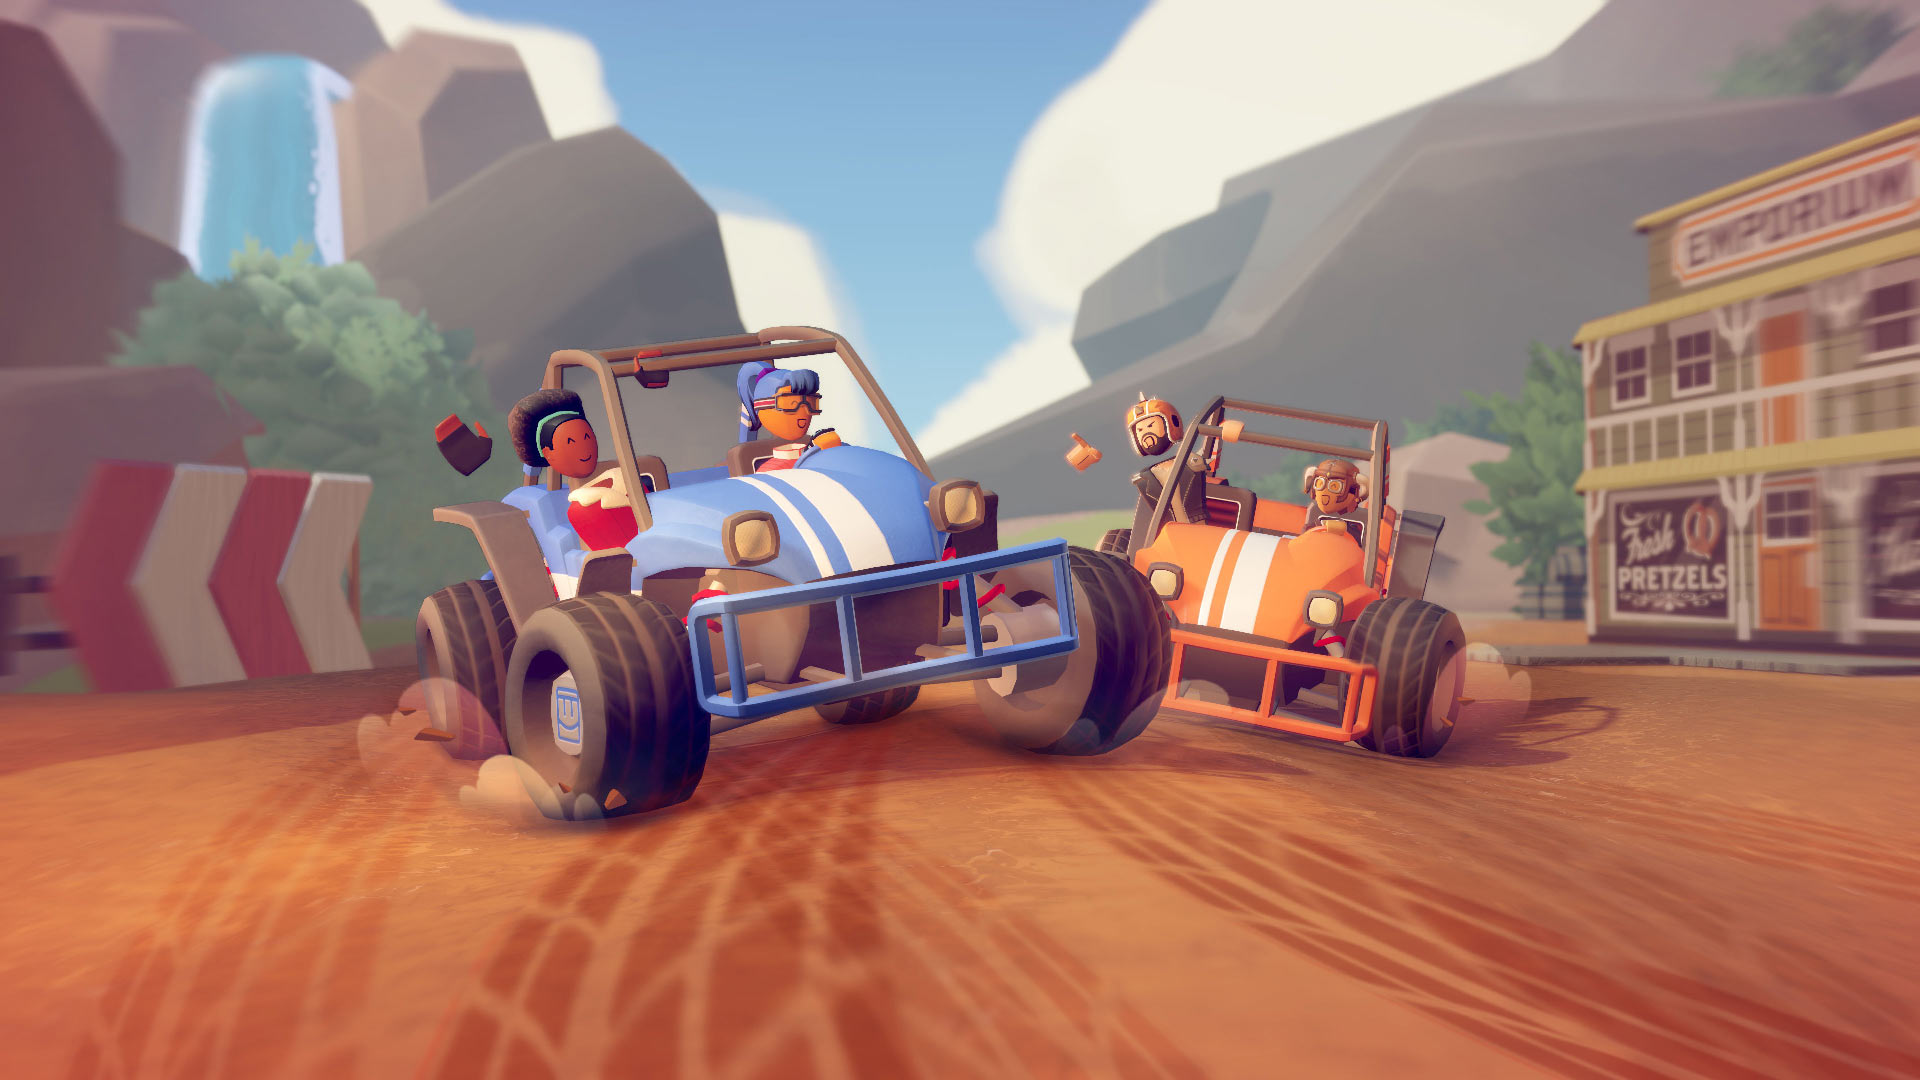 Hands-on: Rec Rally is Another Fun (and free) Slice of ‘Rec Room’ Magic